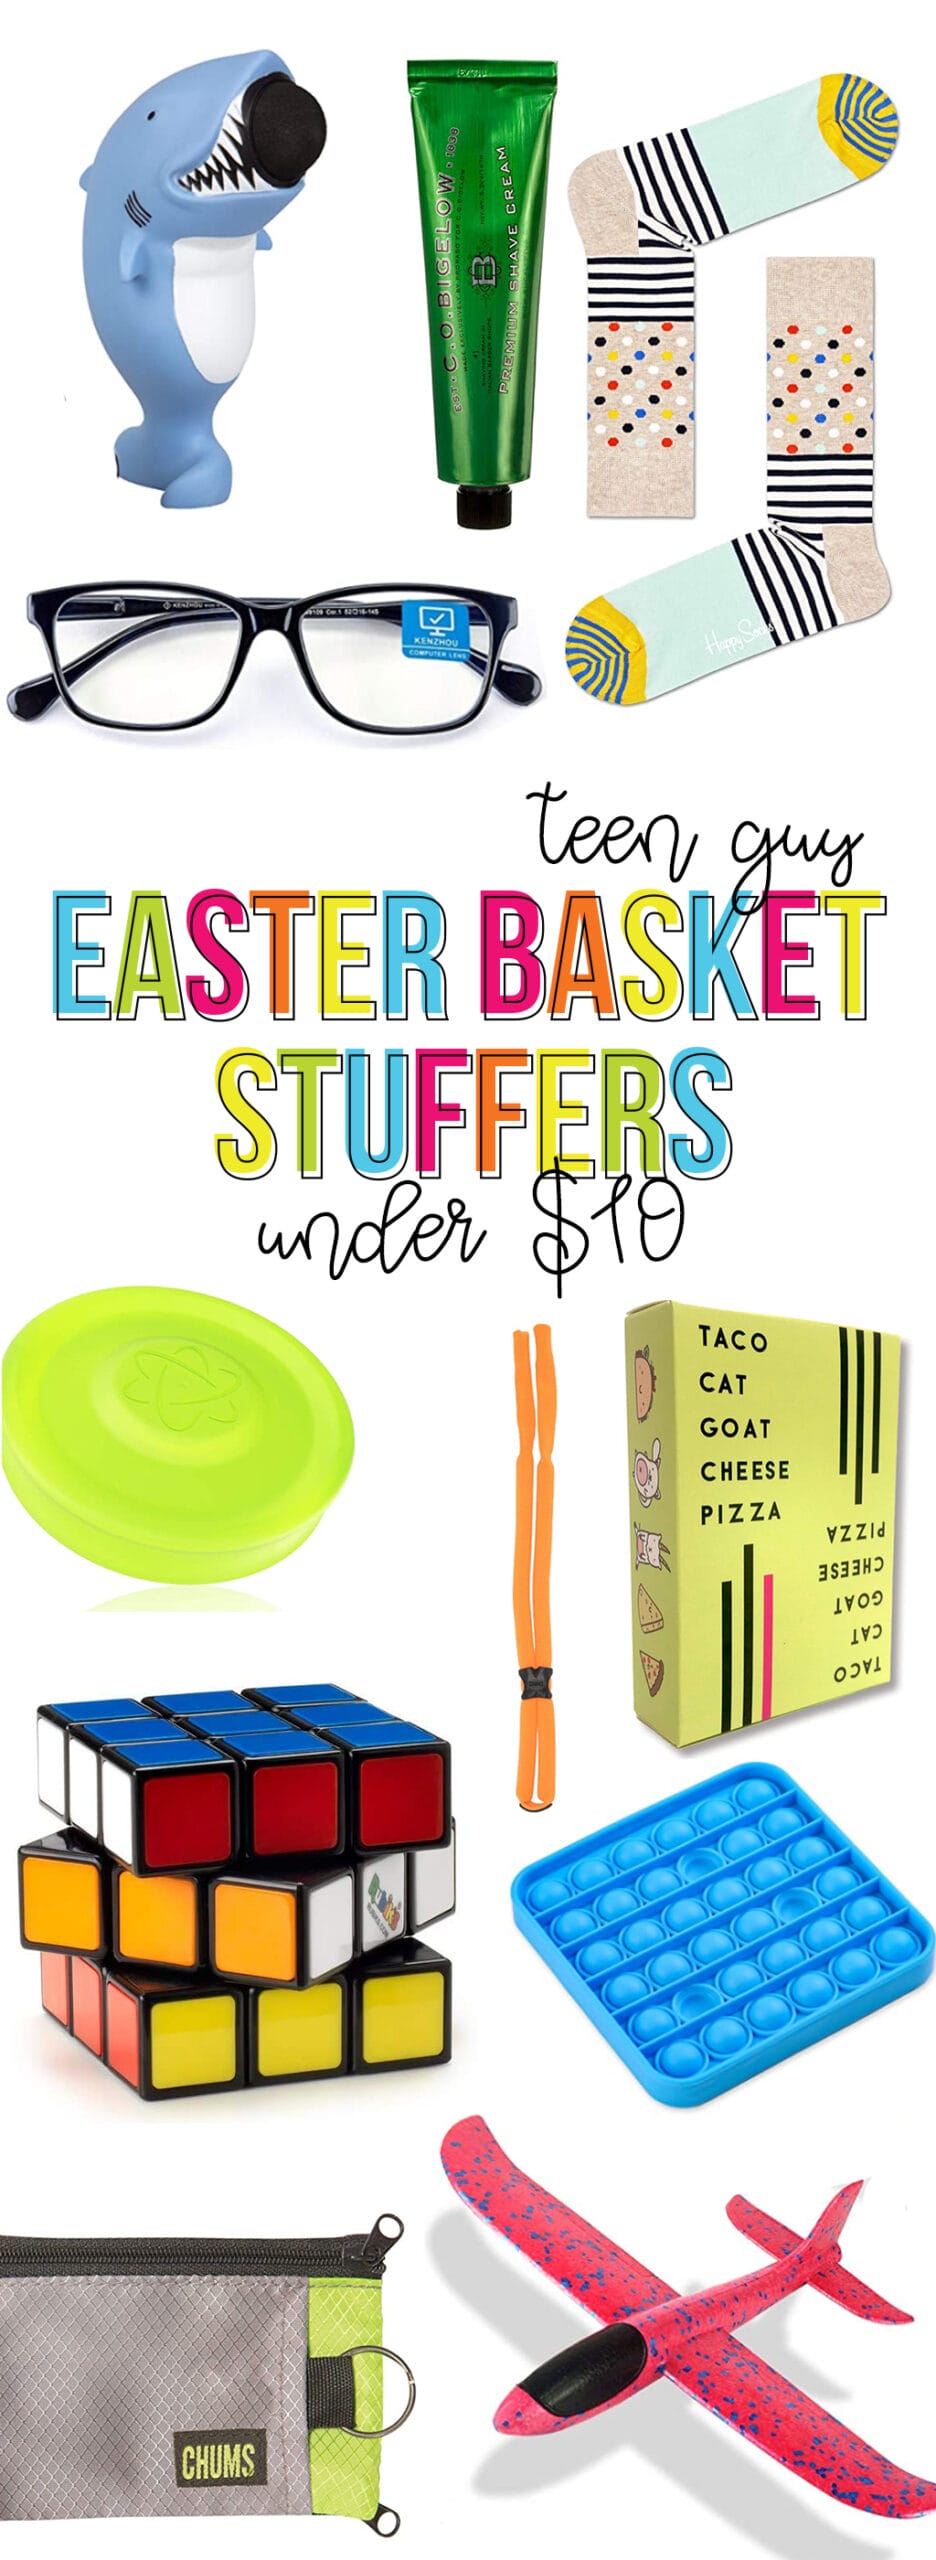 Teen Guy Easter Basket Stuffers Under $10 - The Crafting Chicks